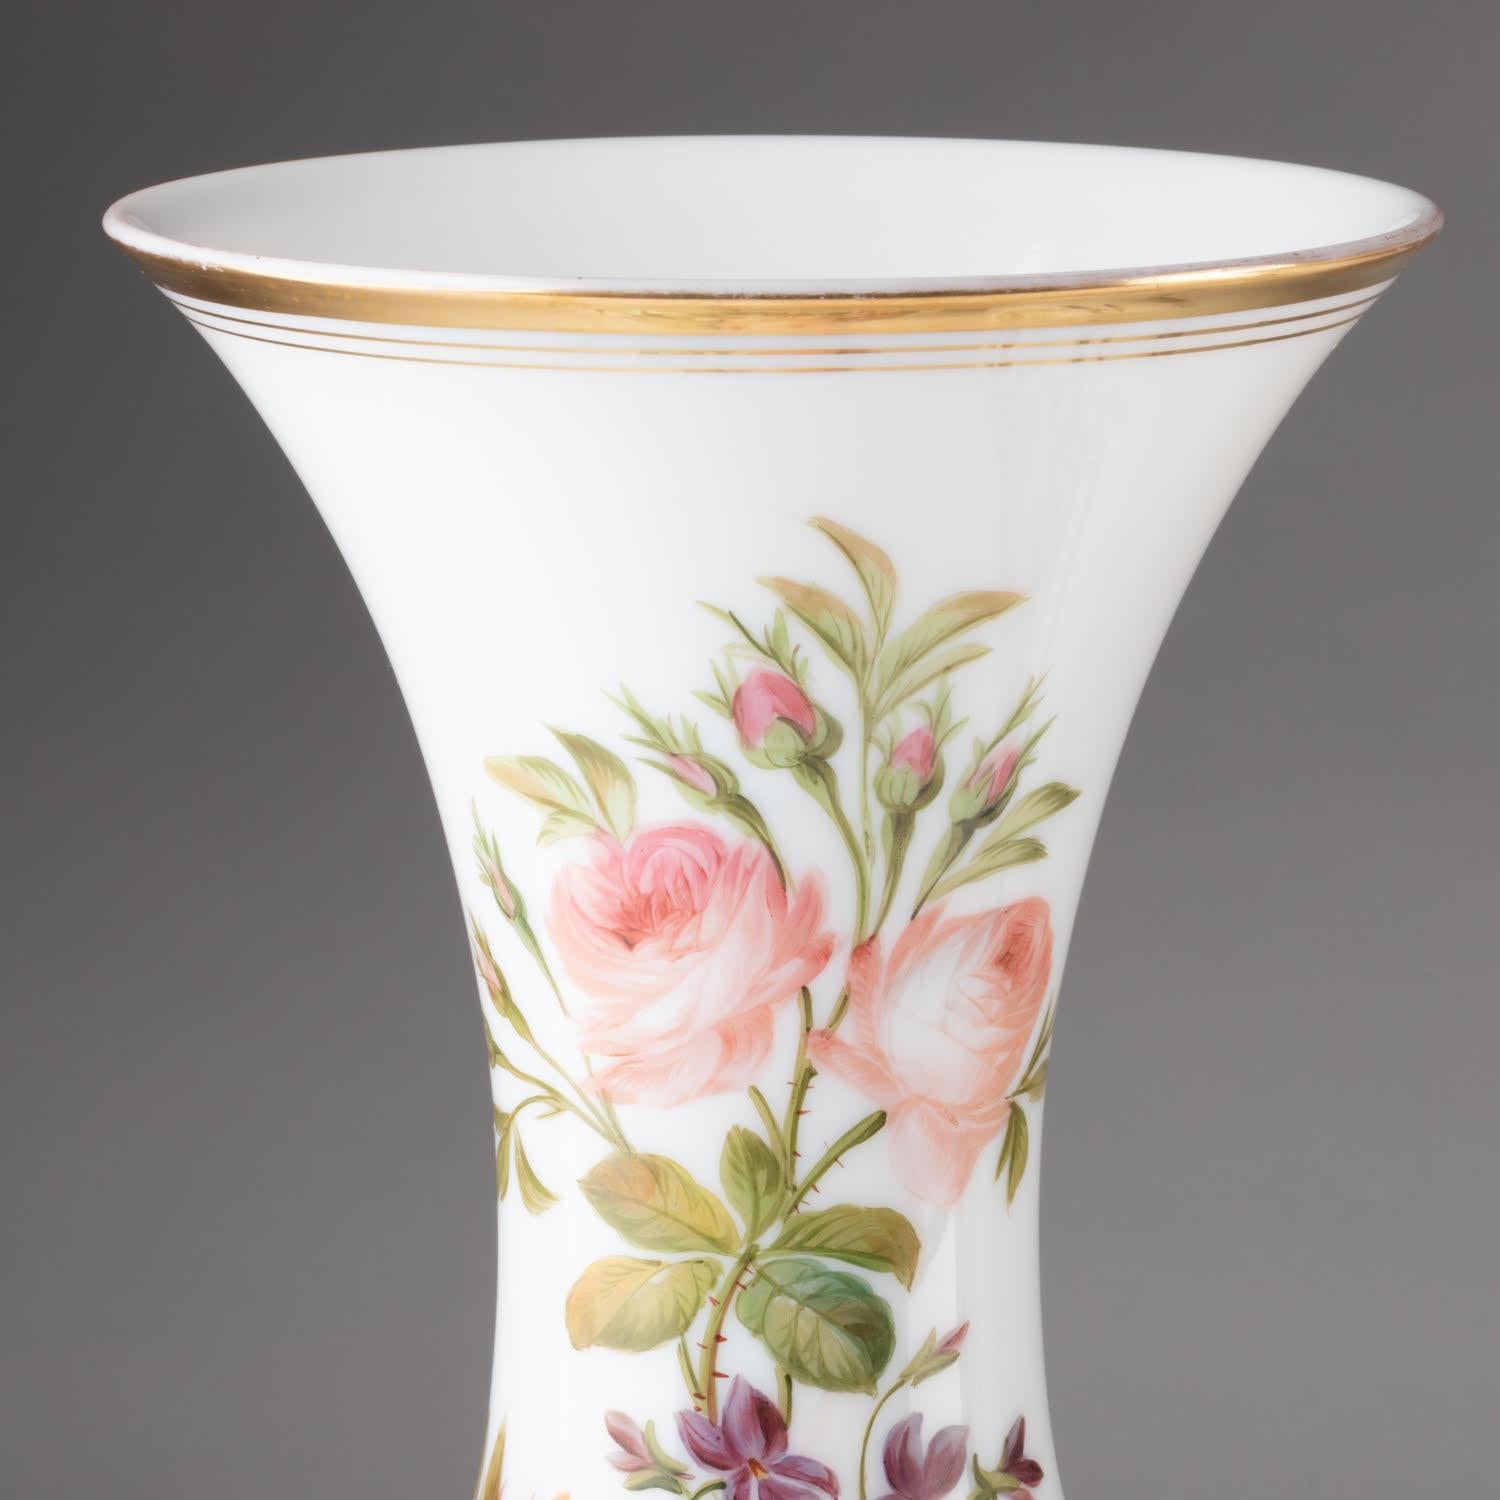 Opaline Glass Pair of Opaline Vases Painted with Floral Motifs, 19th Century. For Sale